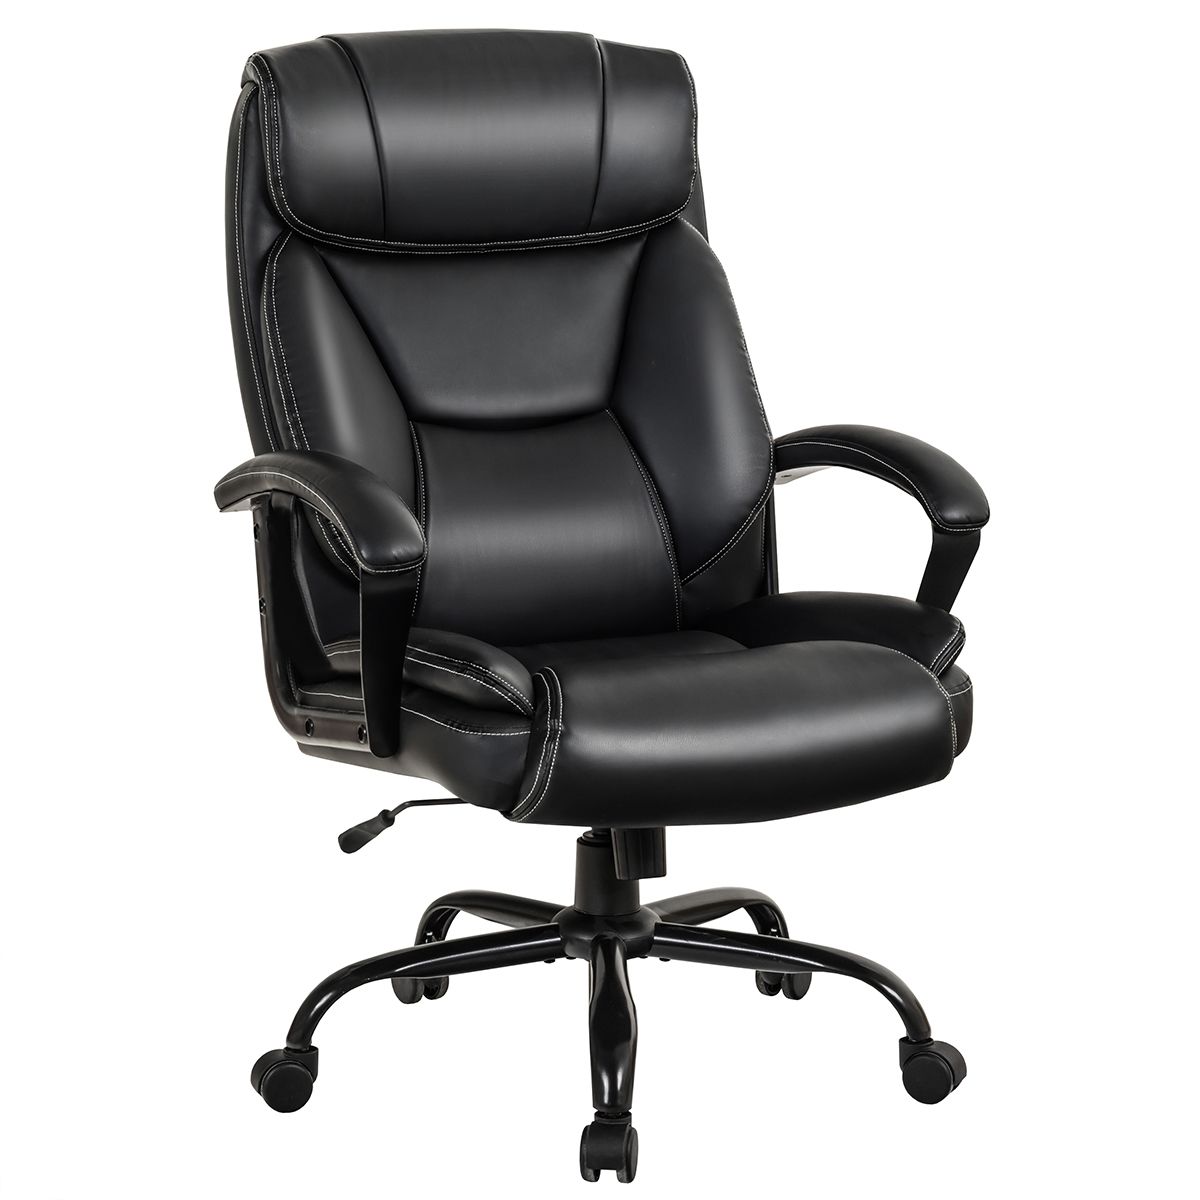 Executive Office Chair Height Adjustable Leather Computer Desk Chair with Rocking Backrest